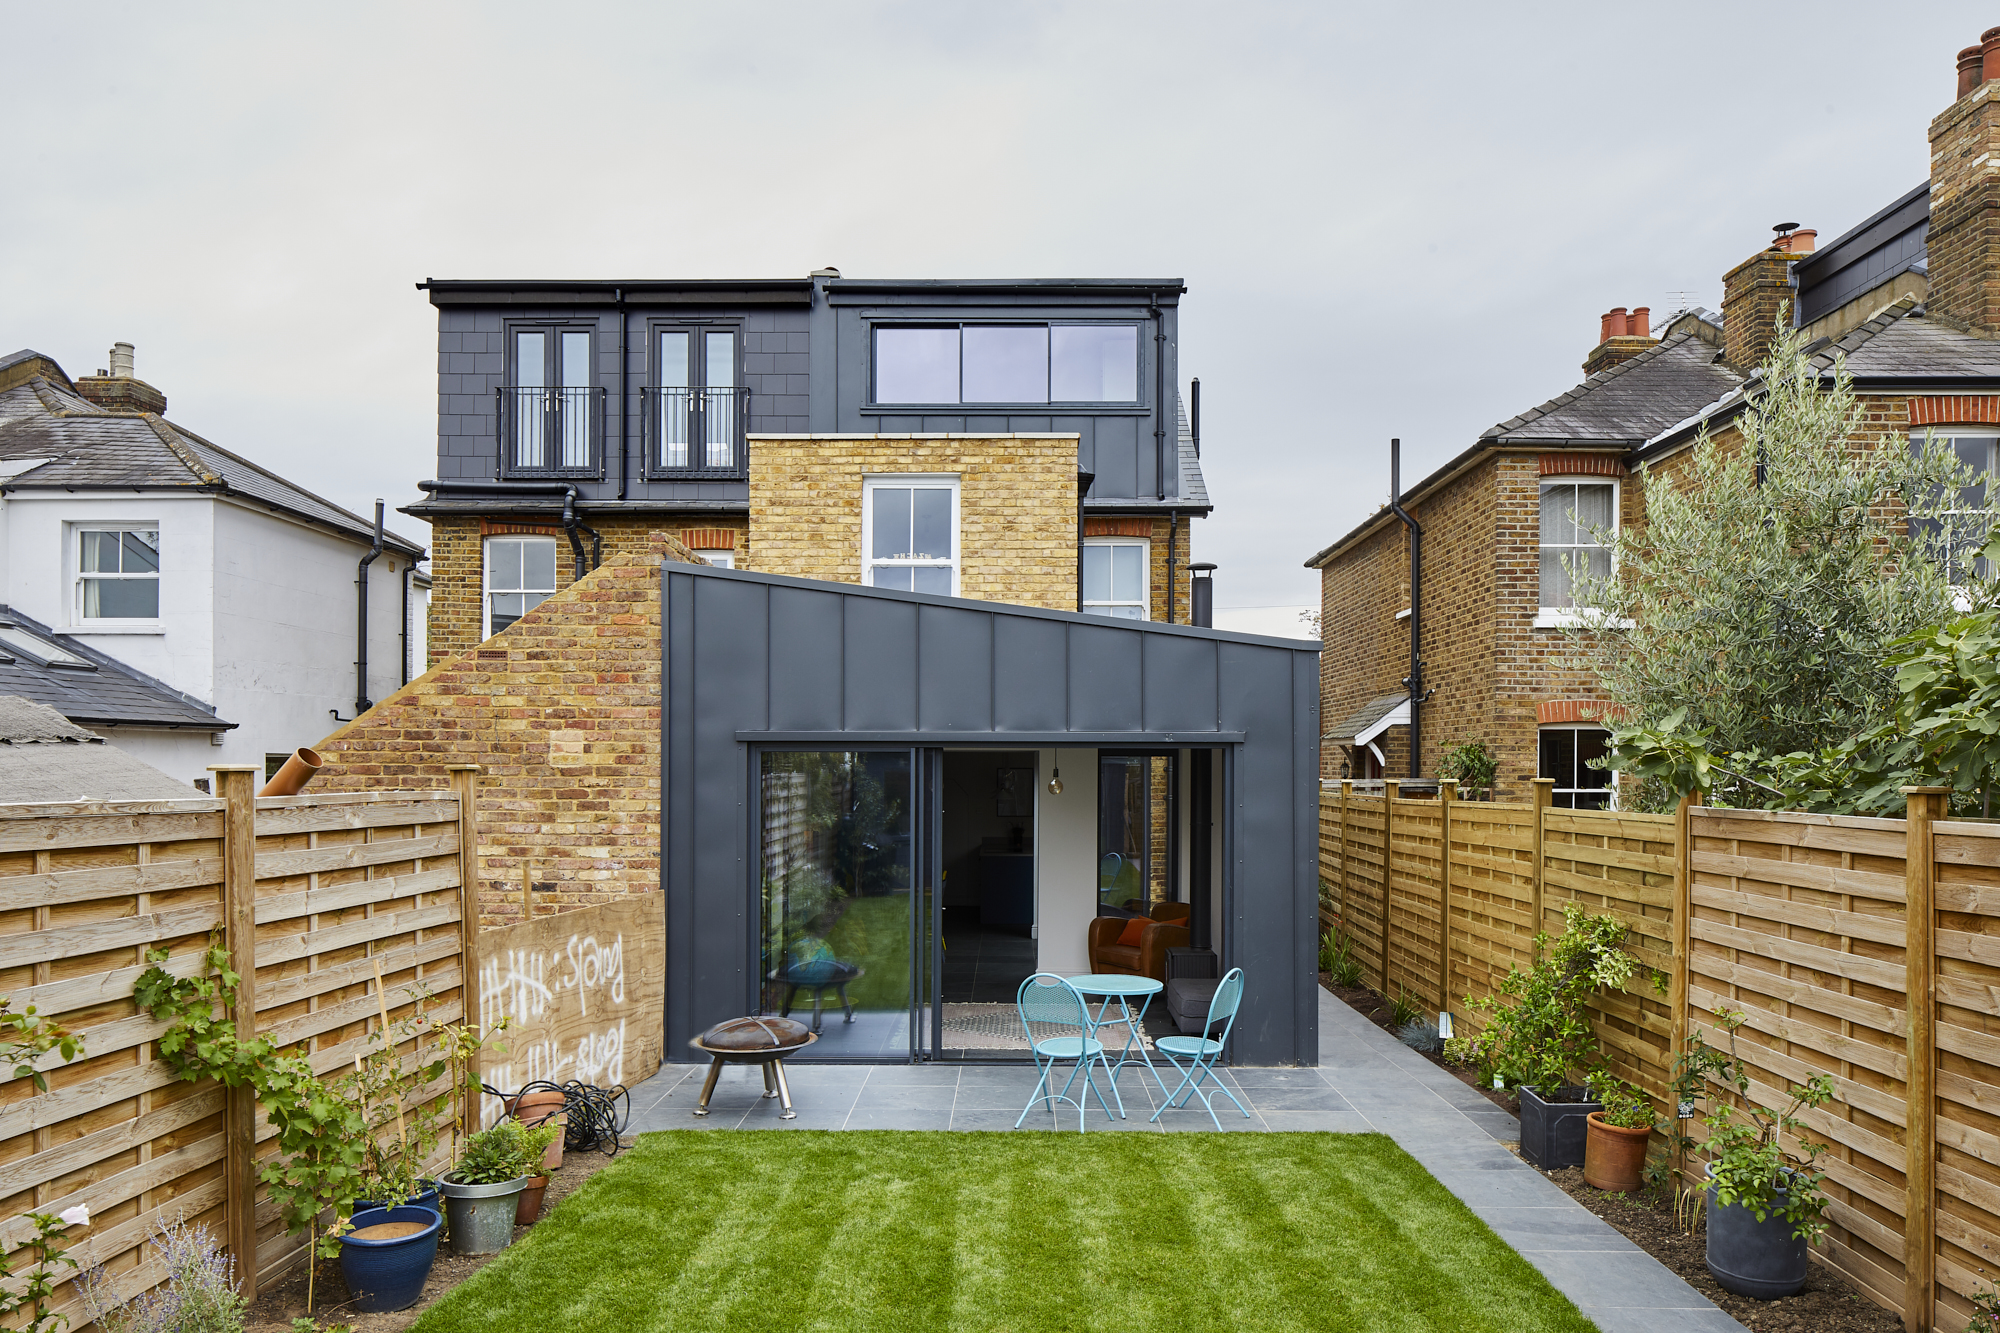  West Molesey, London Extension and Renovation